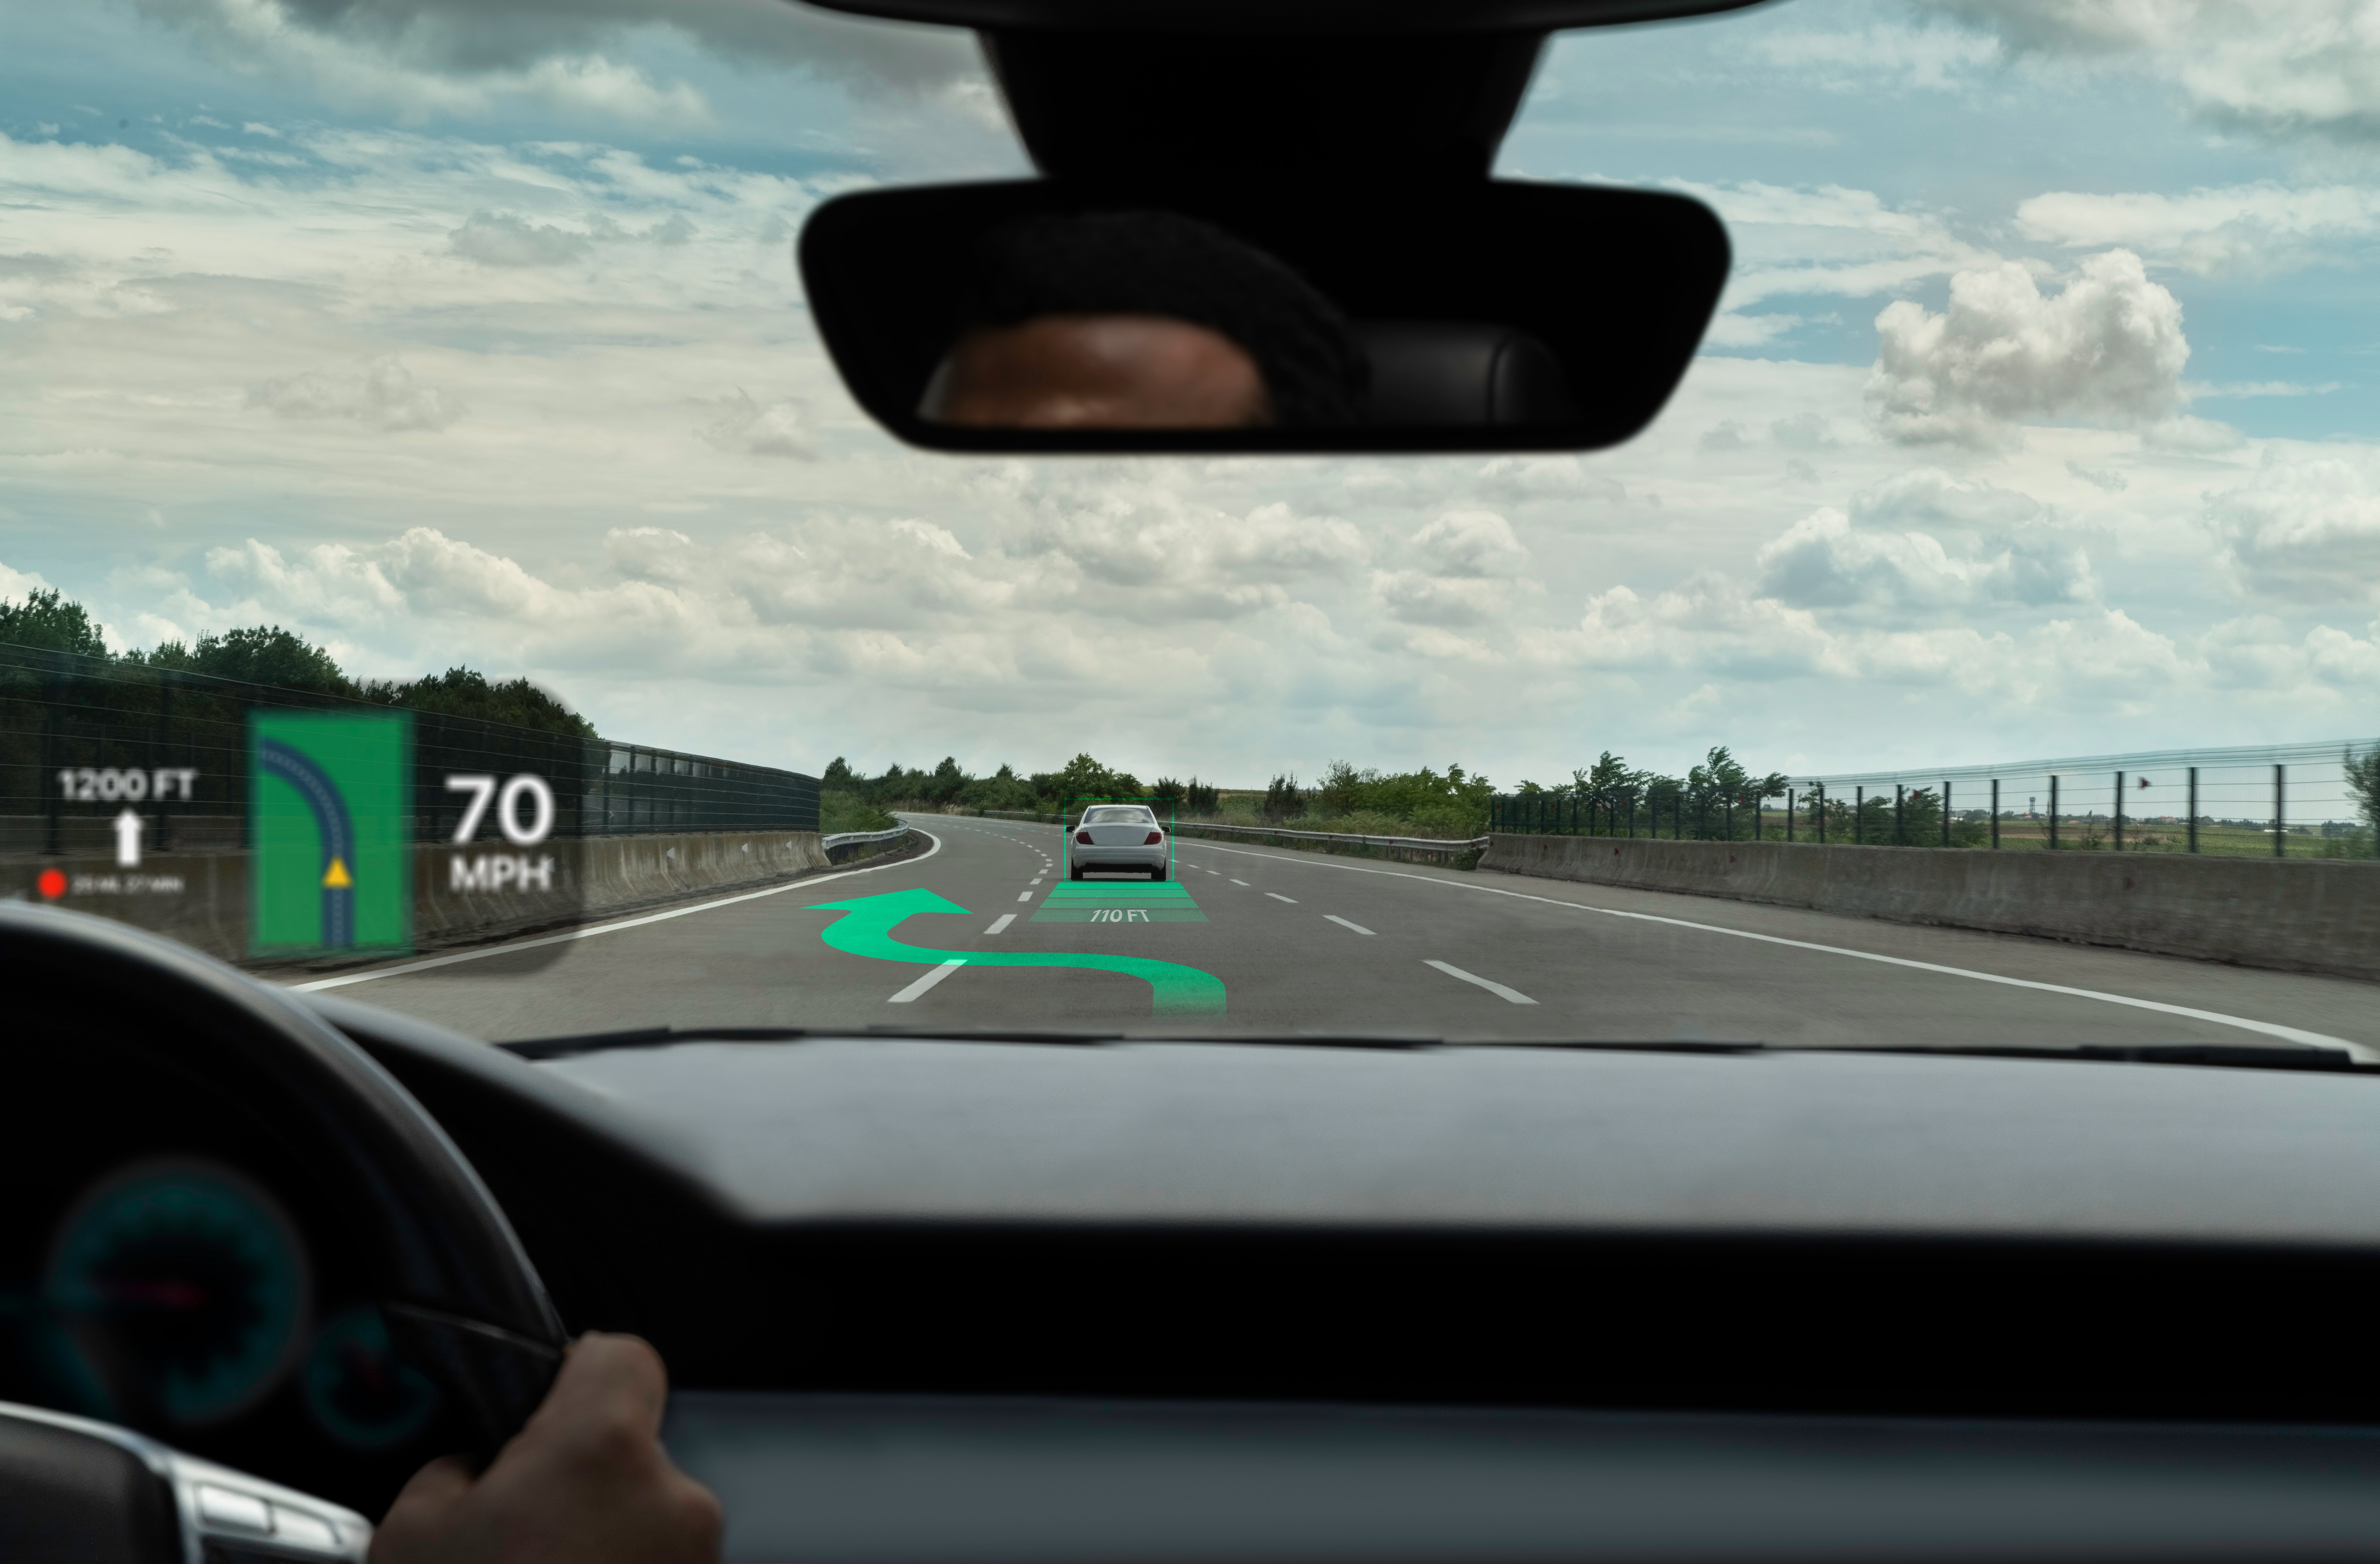 Heads-up display car on road with arrow superimposed on highway